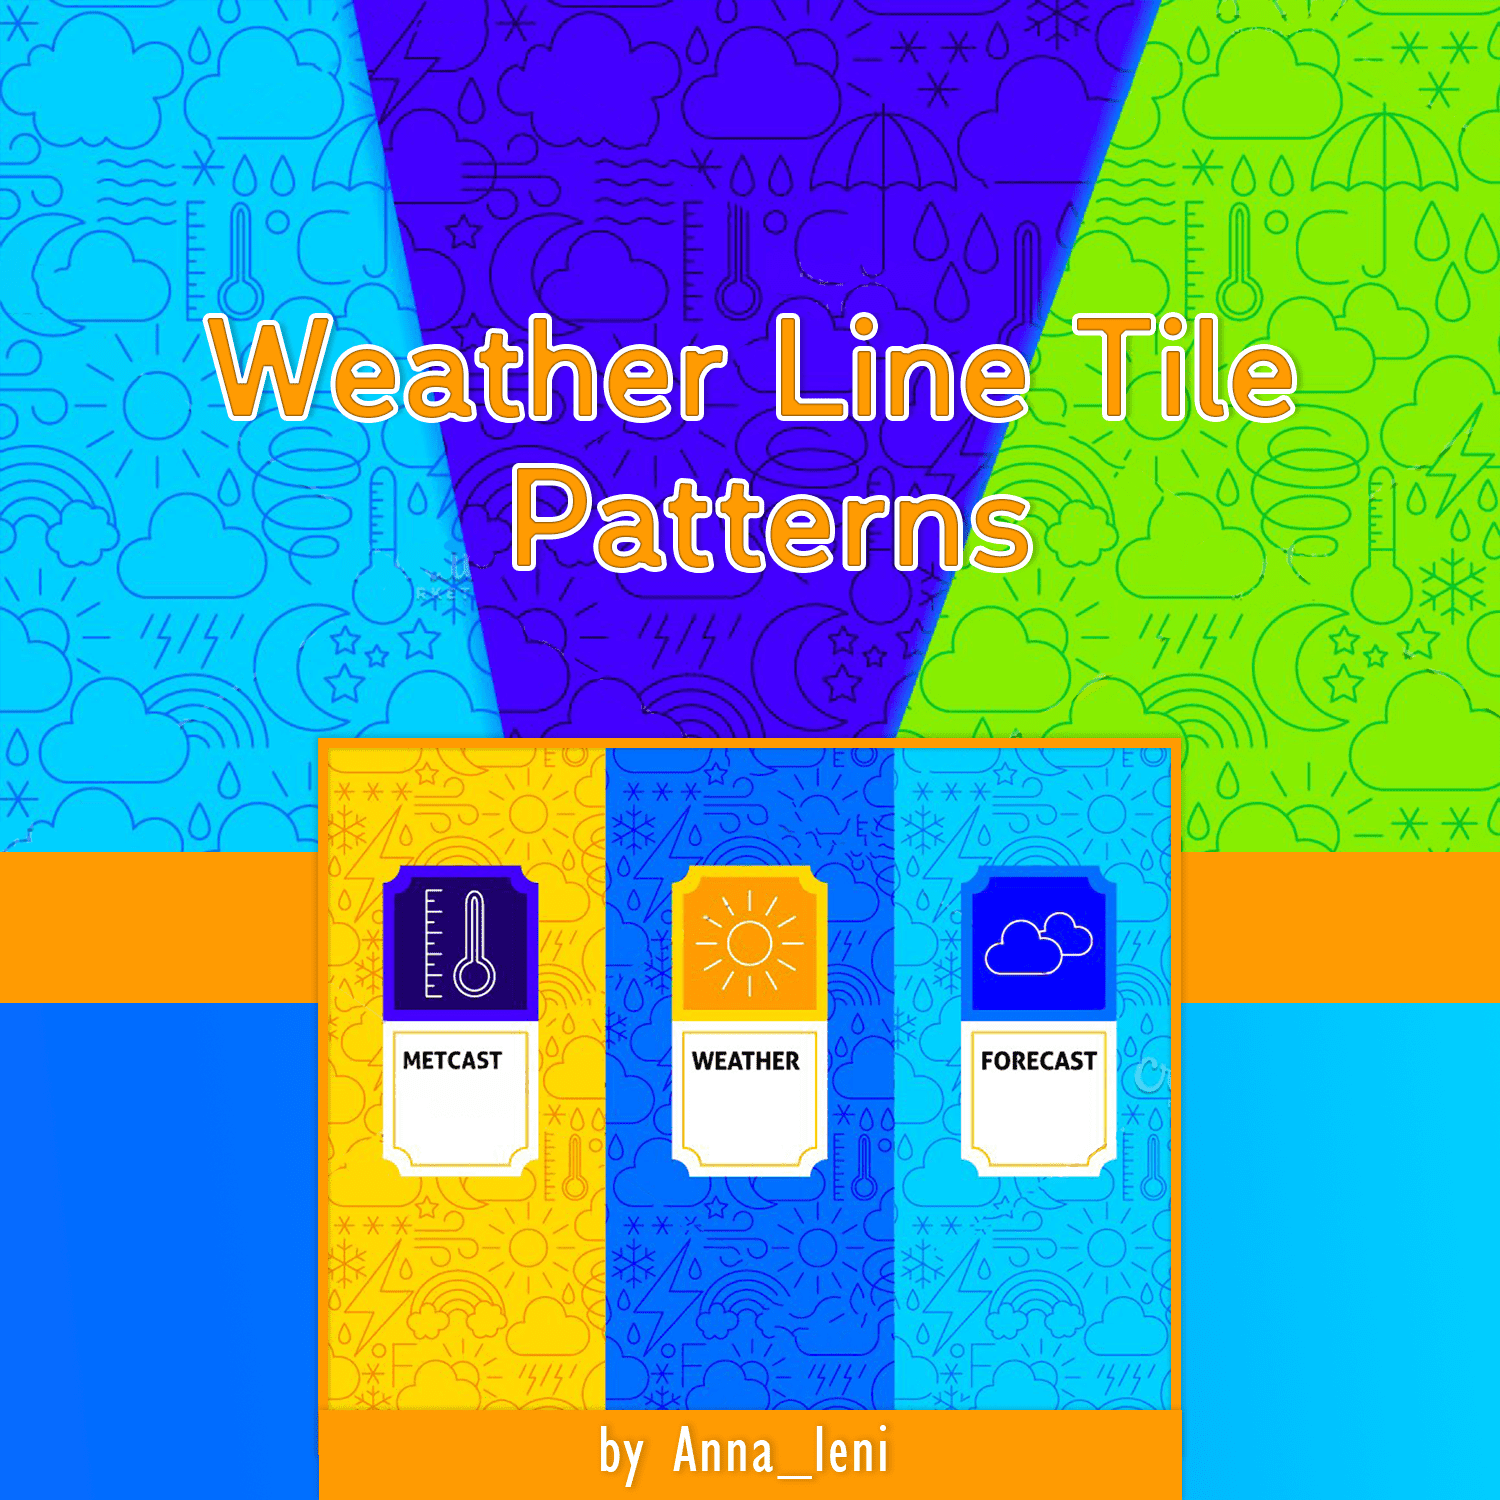 Weather Line Tile Patterns cover.